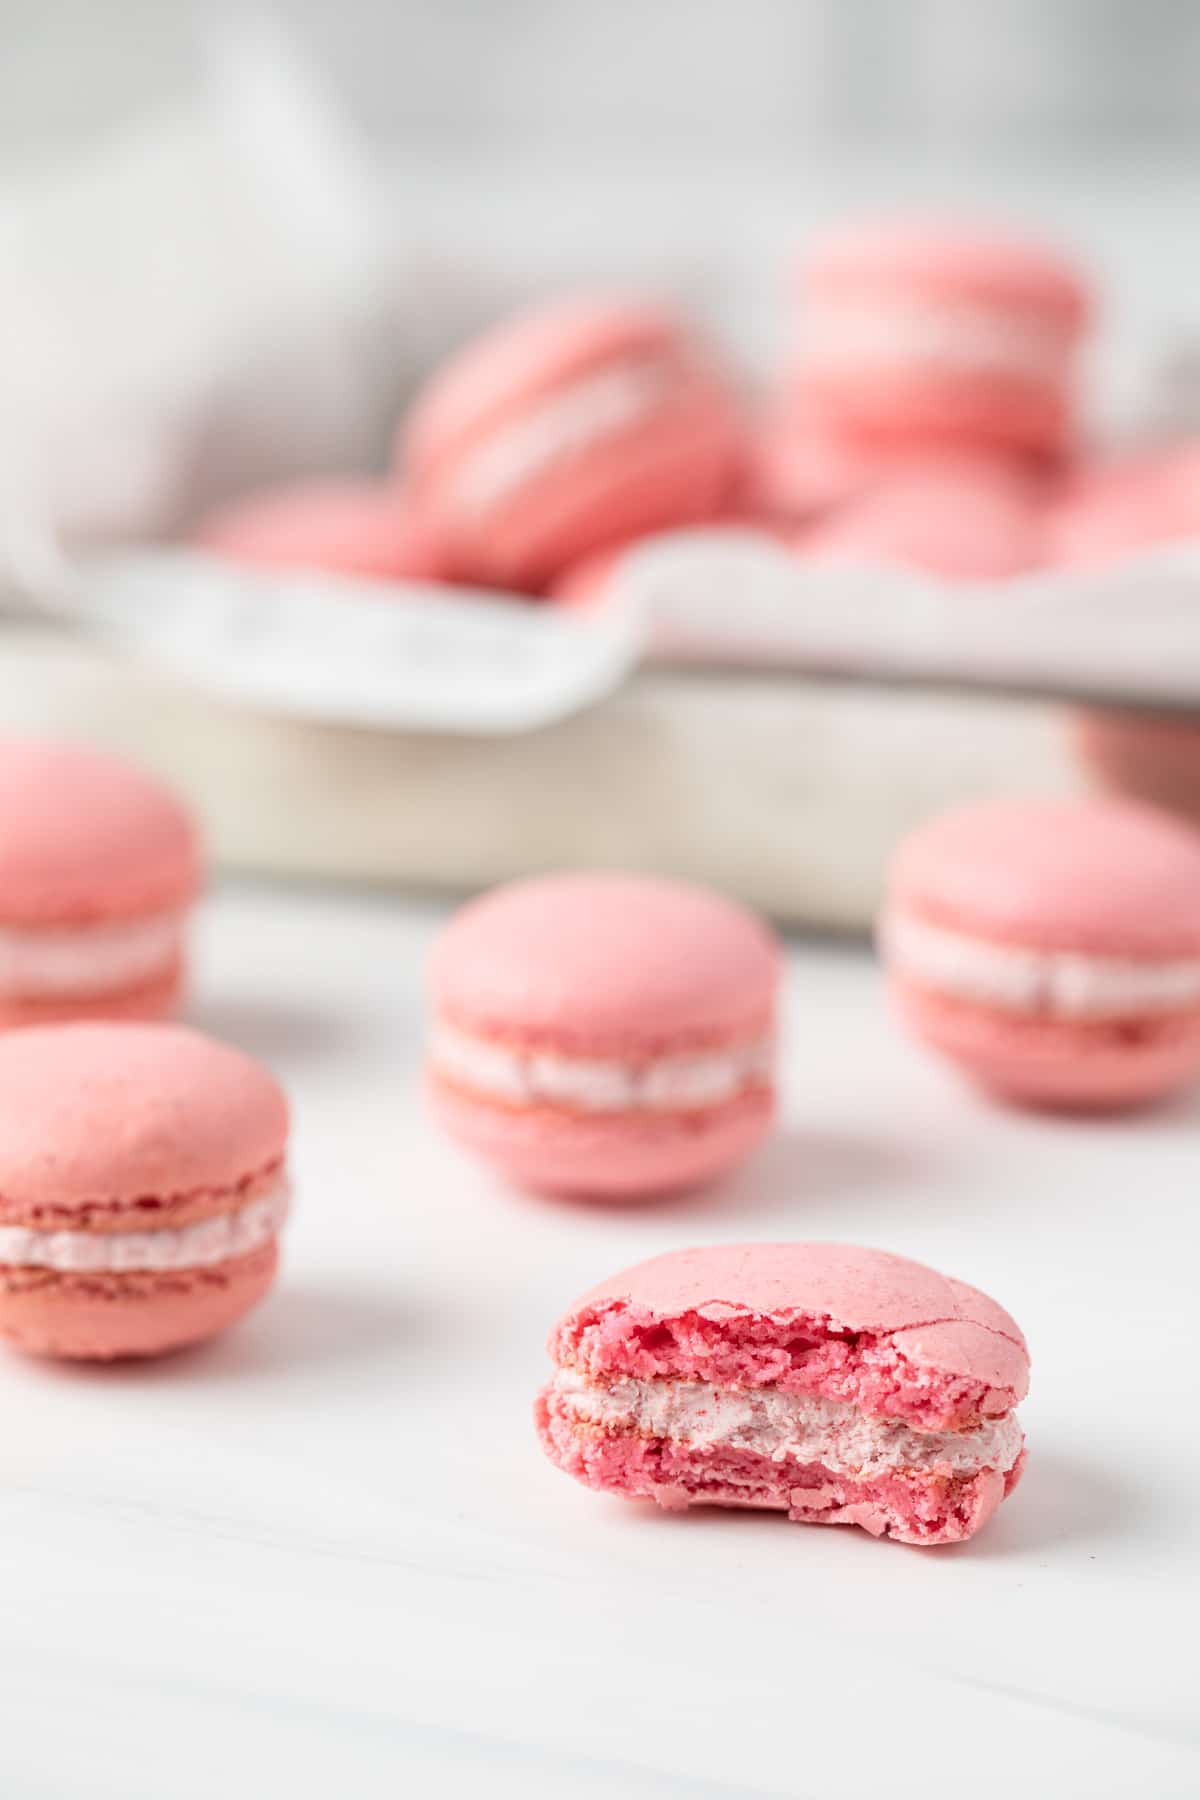 strawberry macaron with a bite taken out so the inside is visible